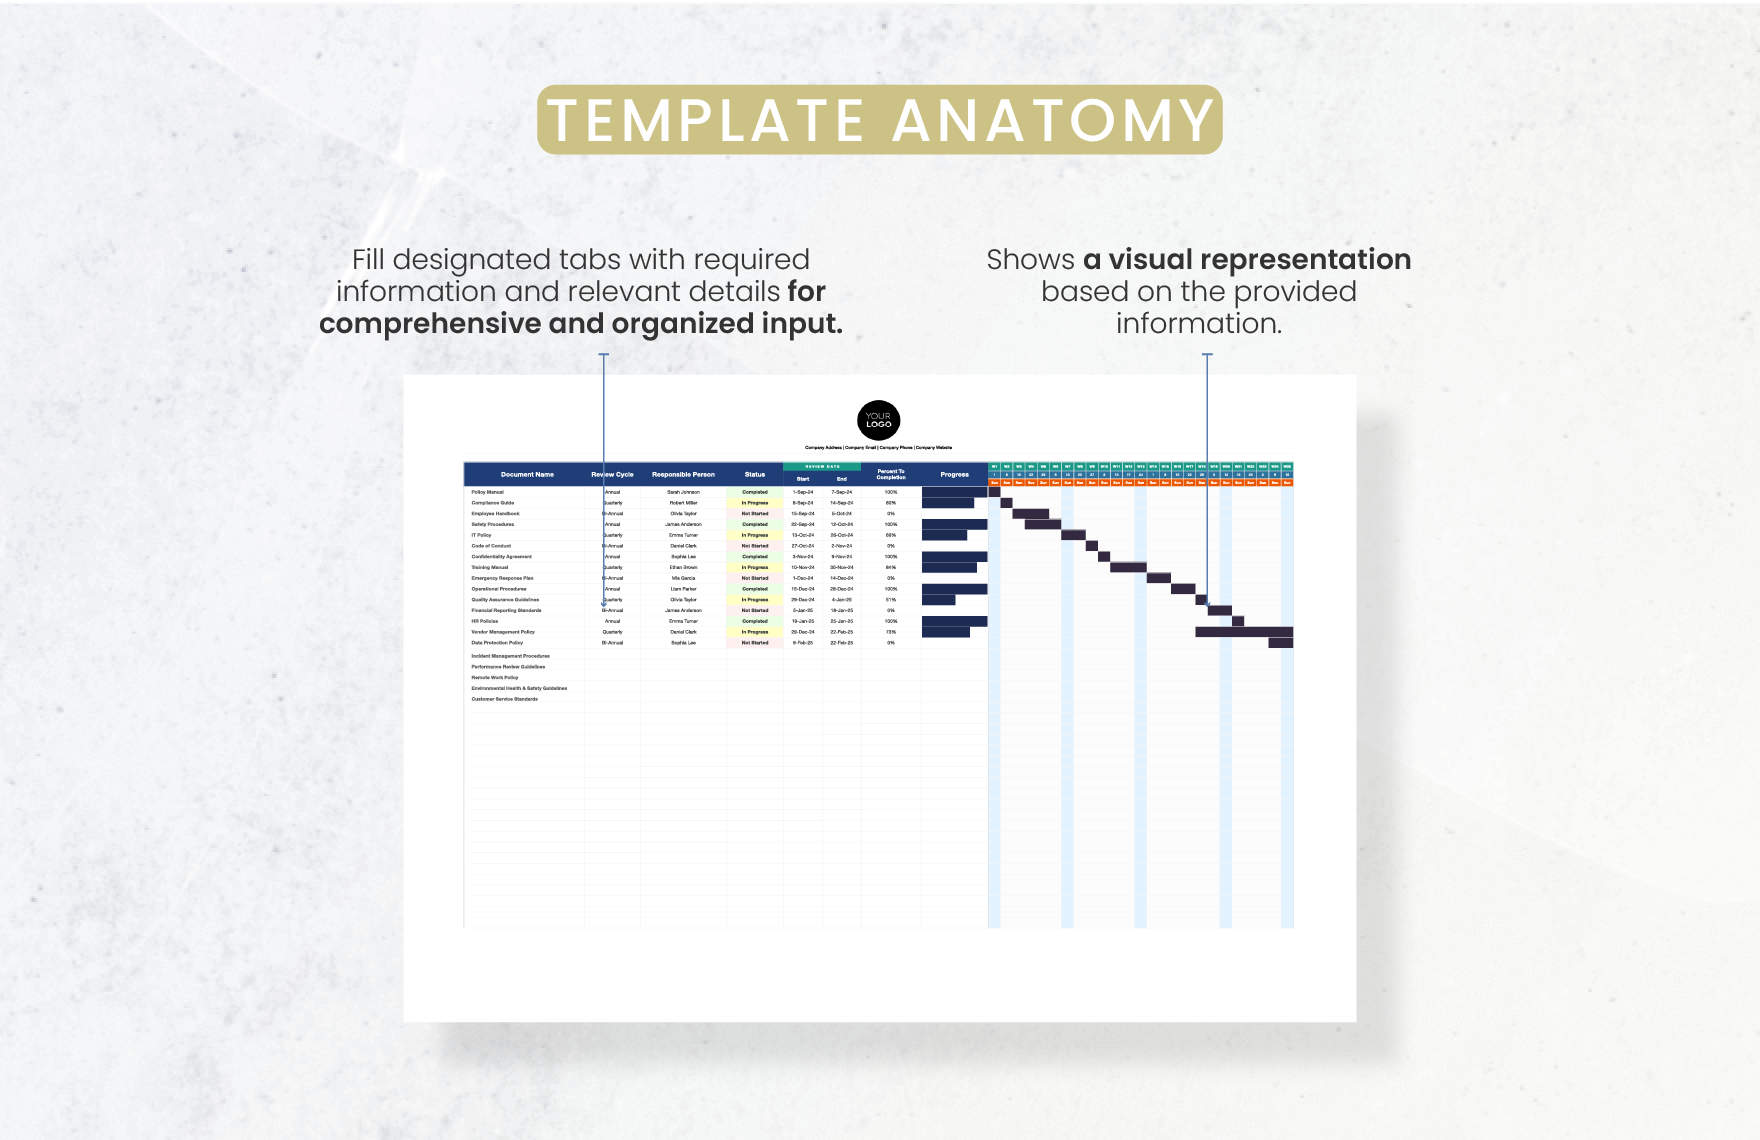 Administration Document Review Cycle Tracker Template